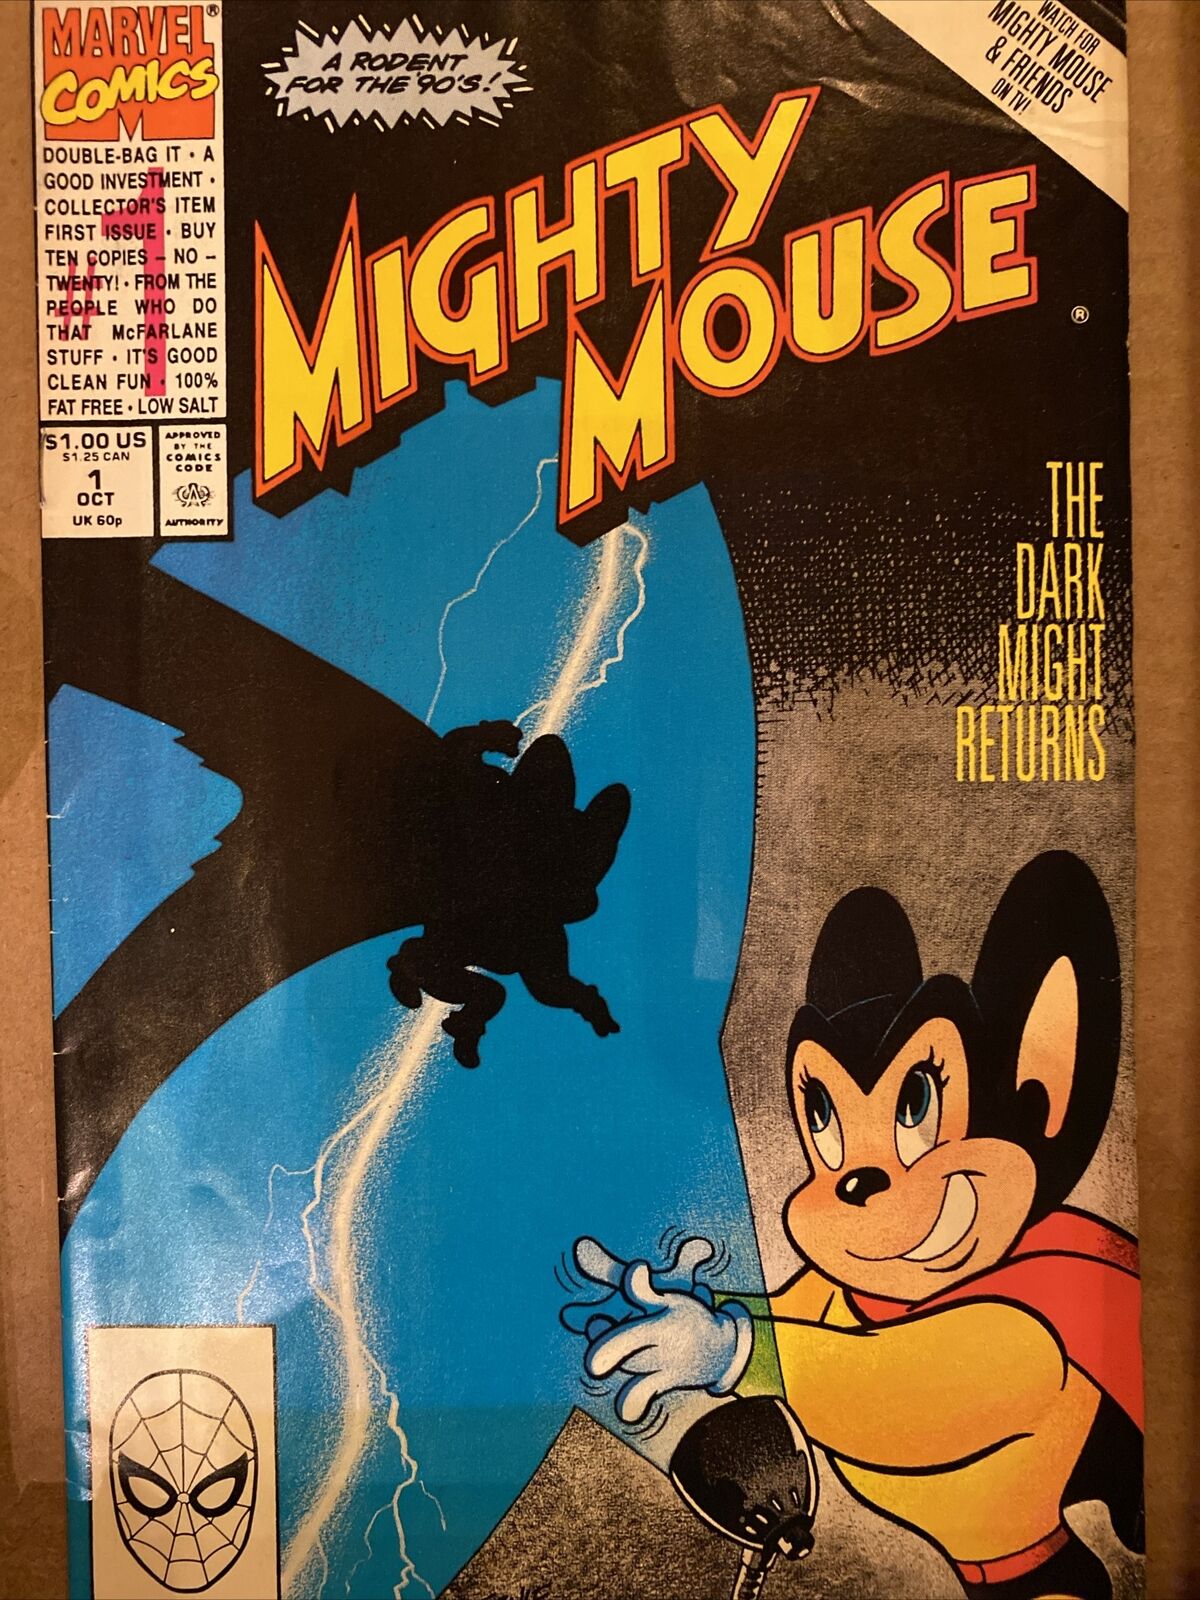 Mighty Mouse #1 (Marvel Comics October 1990)